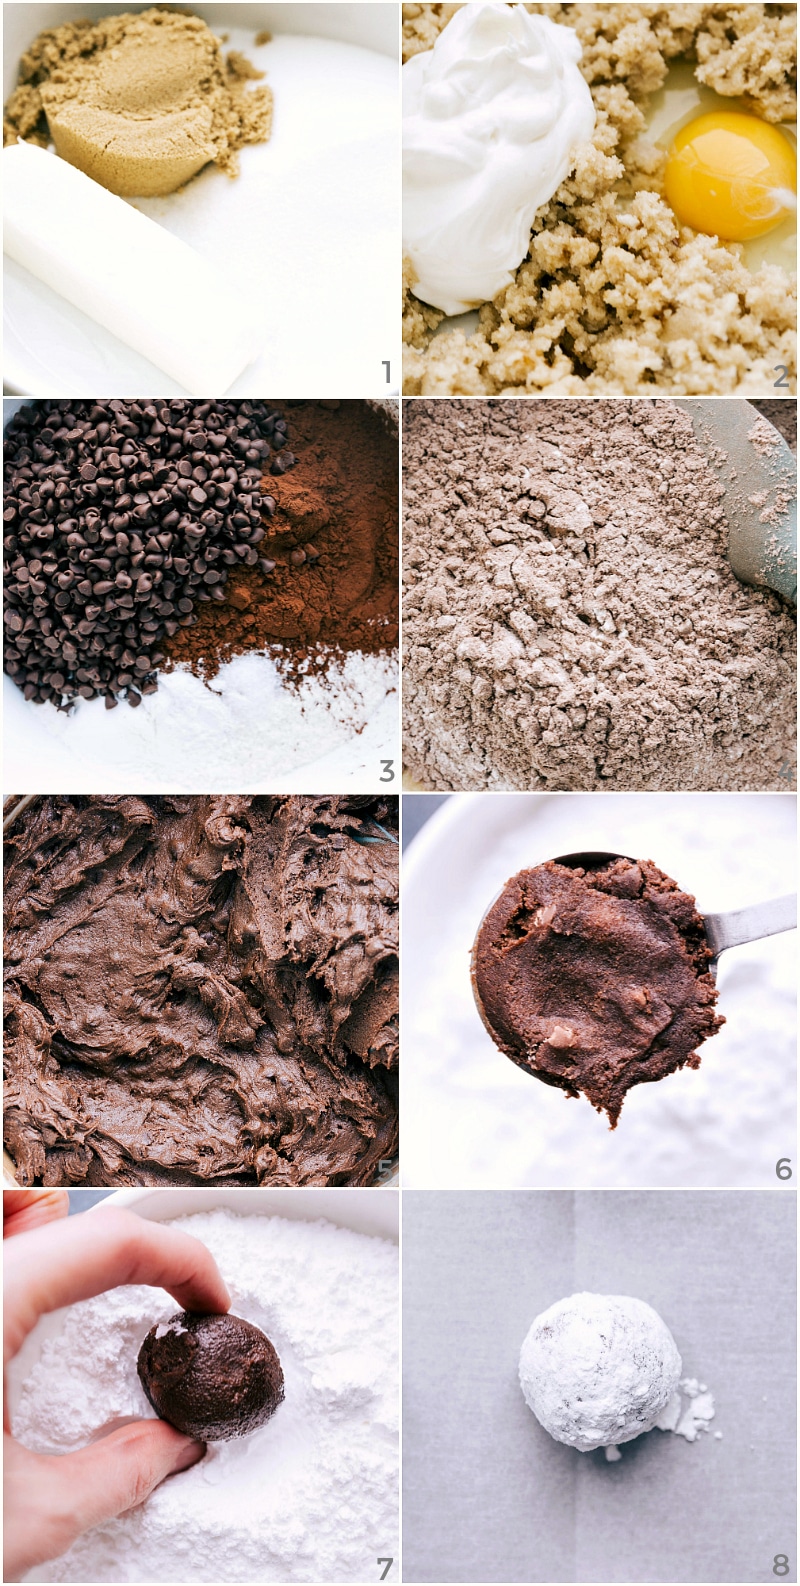 Process shots of Chocolate Crinkle Cookies being made: combining the butter with the sugars; mixing in the egg and sour cream; adding chocolate chips and cocoa; mixing dry ingredients; combining everything; scooping dough; forming dough into balls; rolling dough balls in powdered sugar.